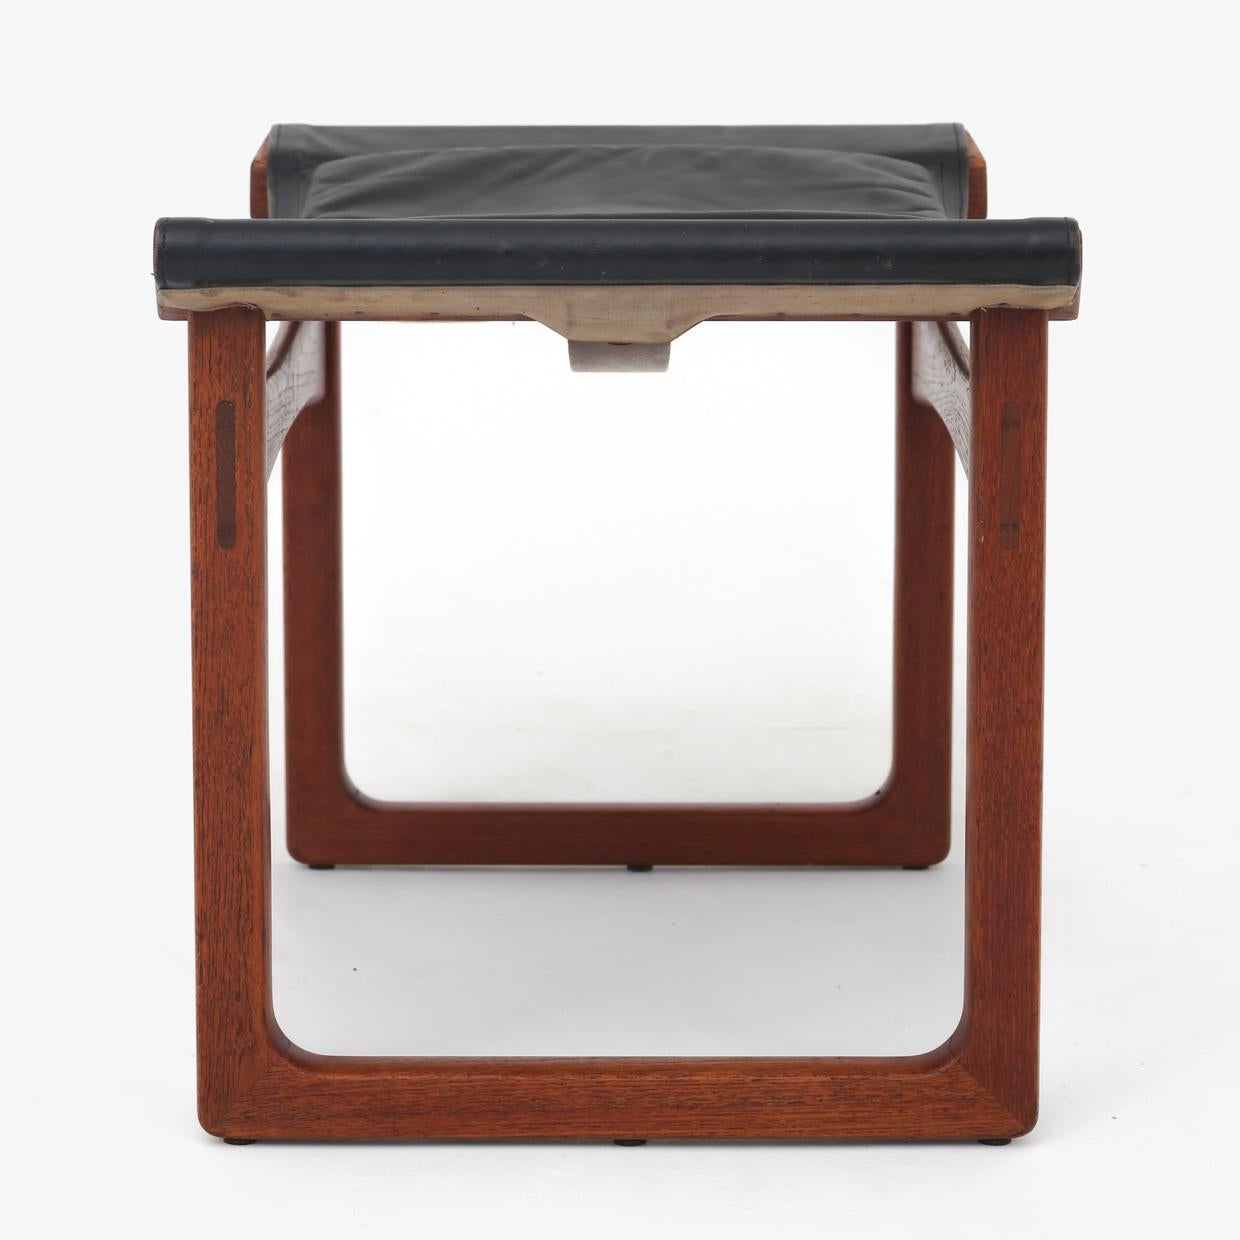 'China Stool' in solid teak with patinated black leather. Designed in 1951. Maker Ludvig Pontoppidan.